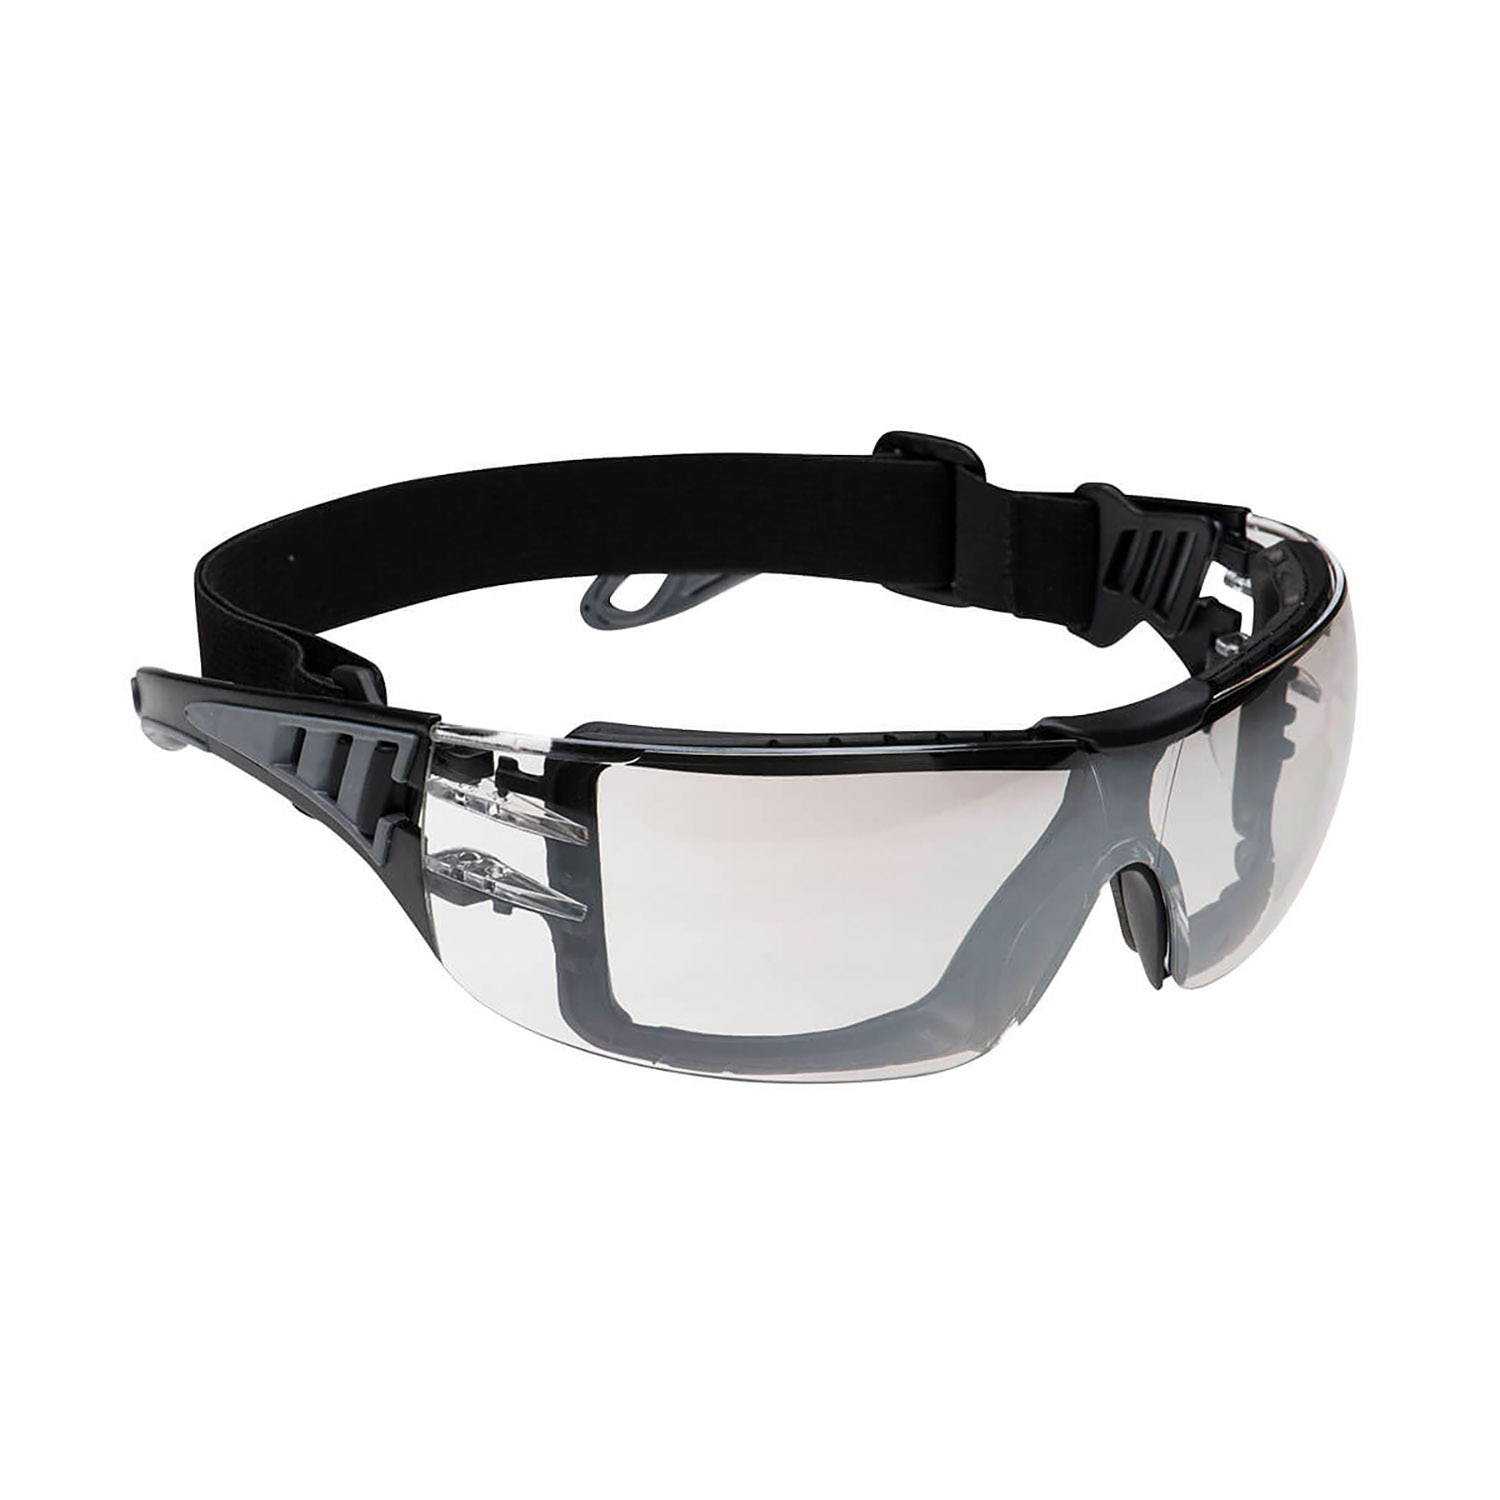 Dielectric Safety Glasses